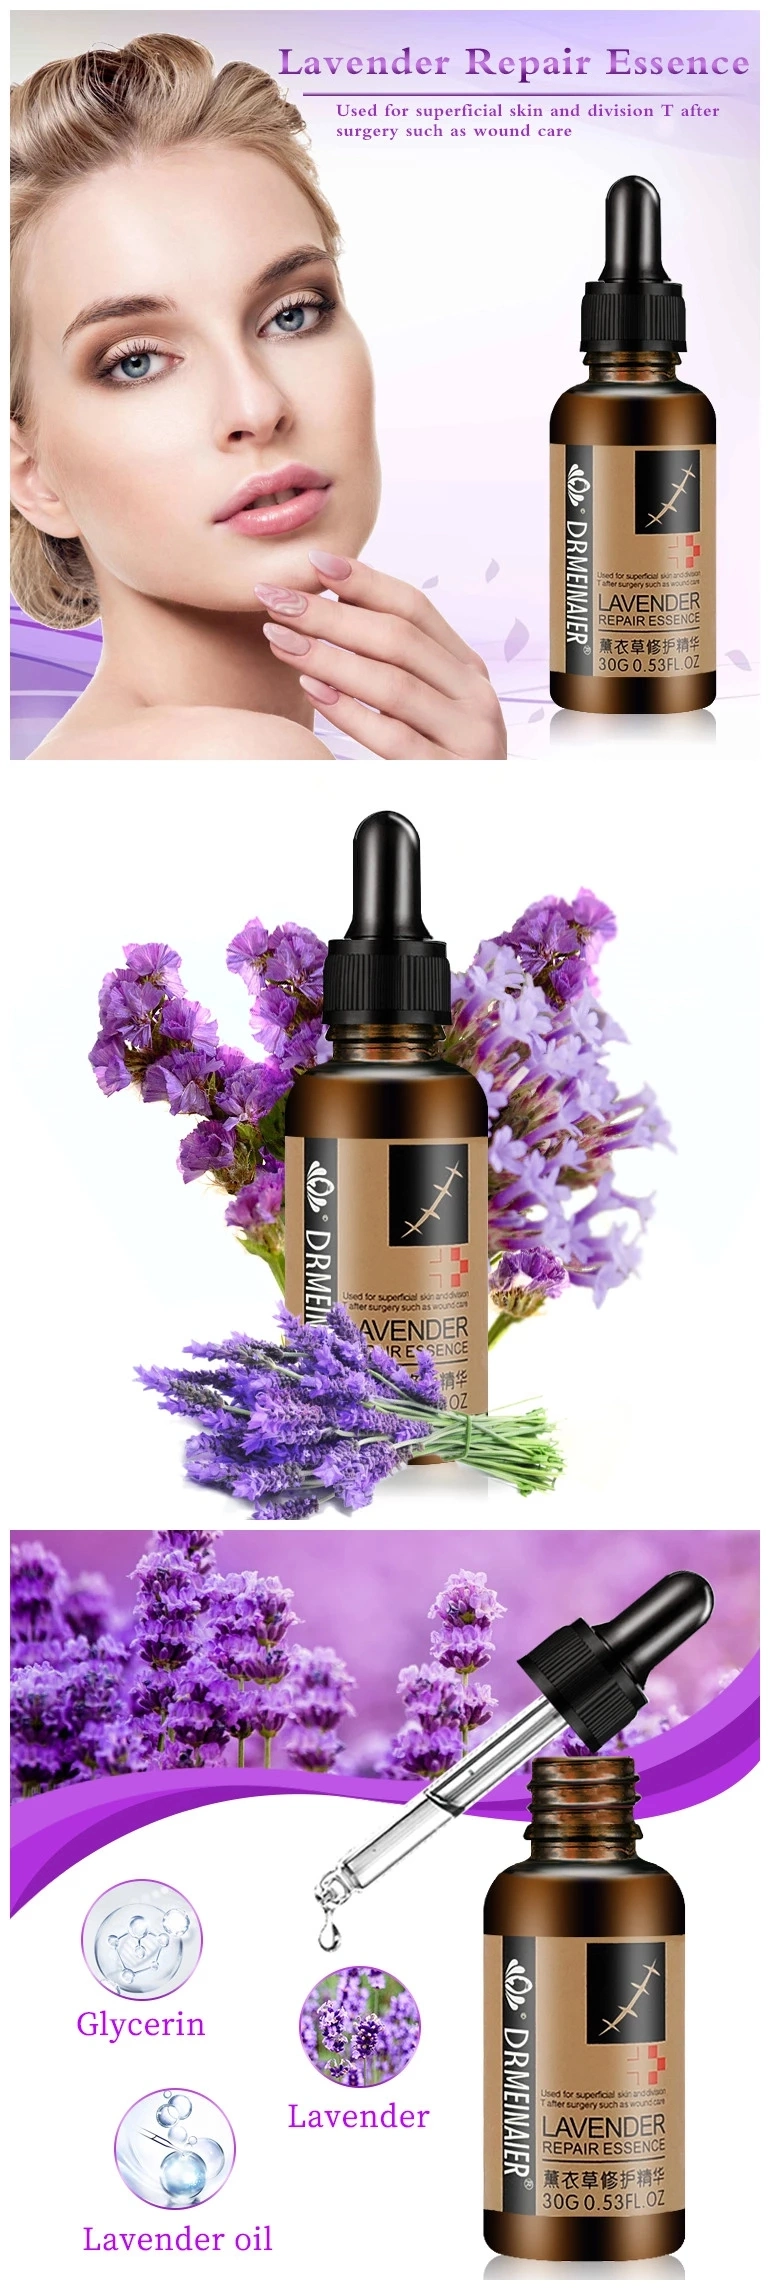 Highly Effective Natural Lavender Skin Care Repair Essence Face Serum Private Label